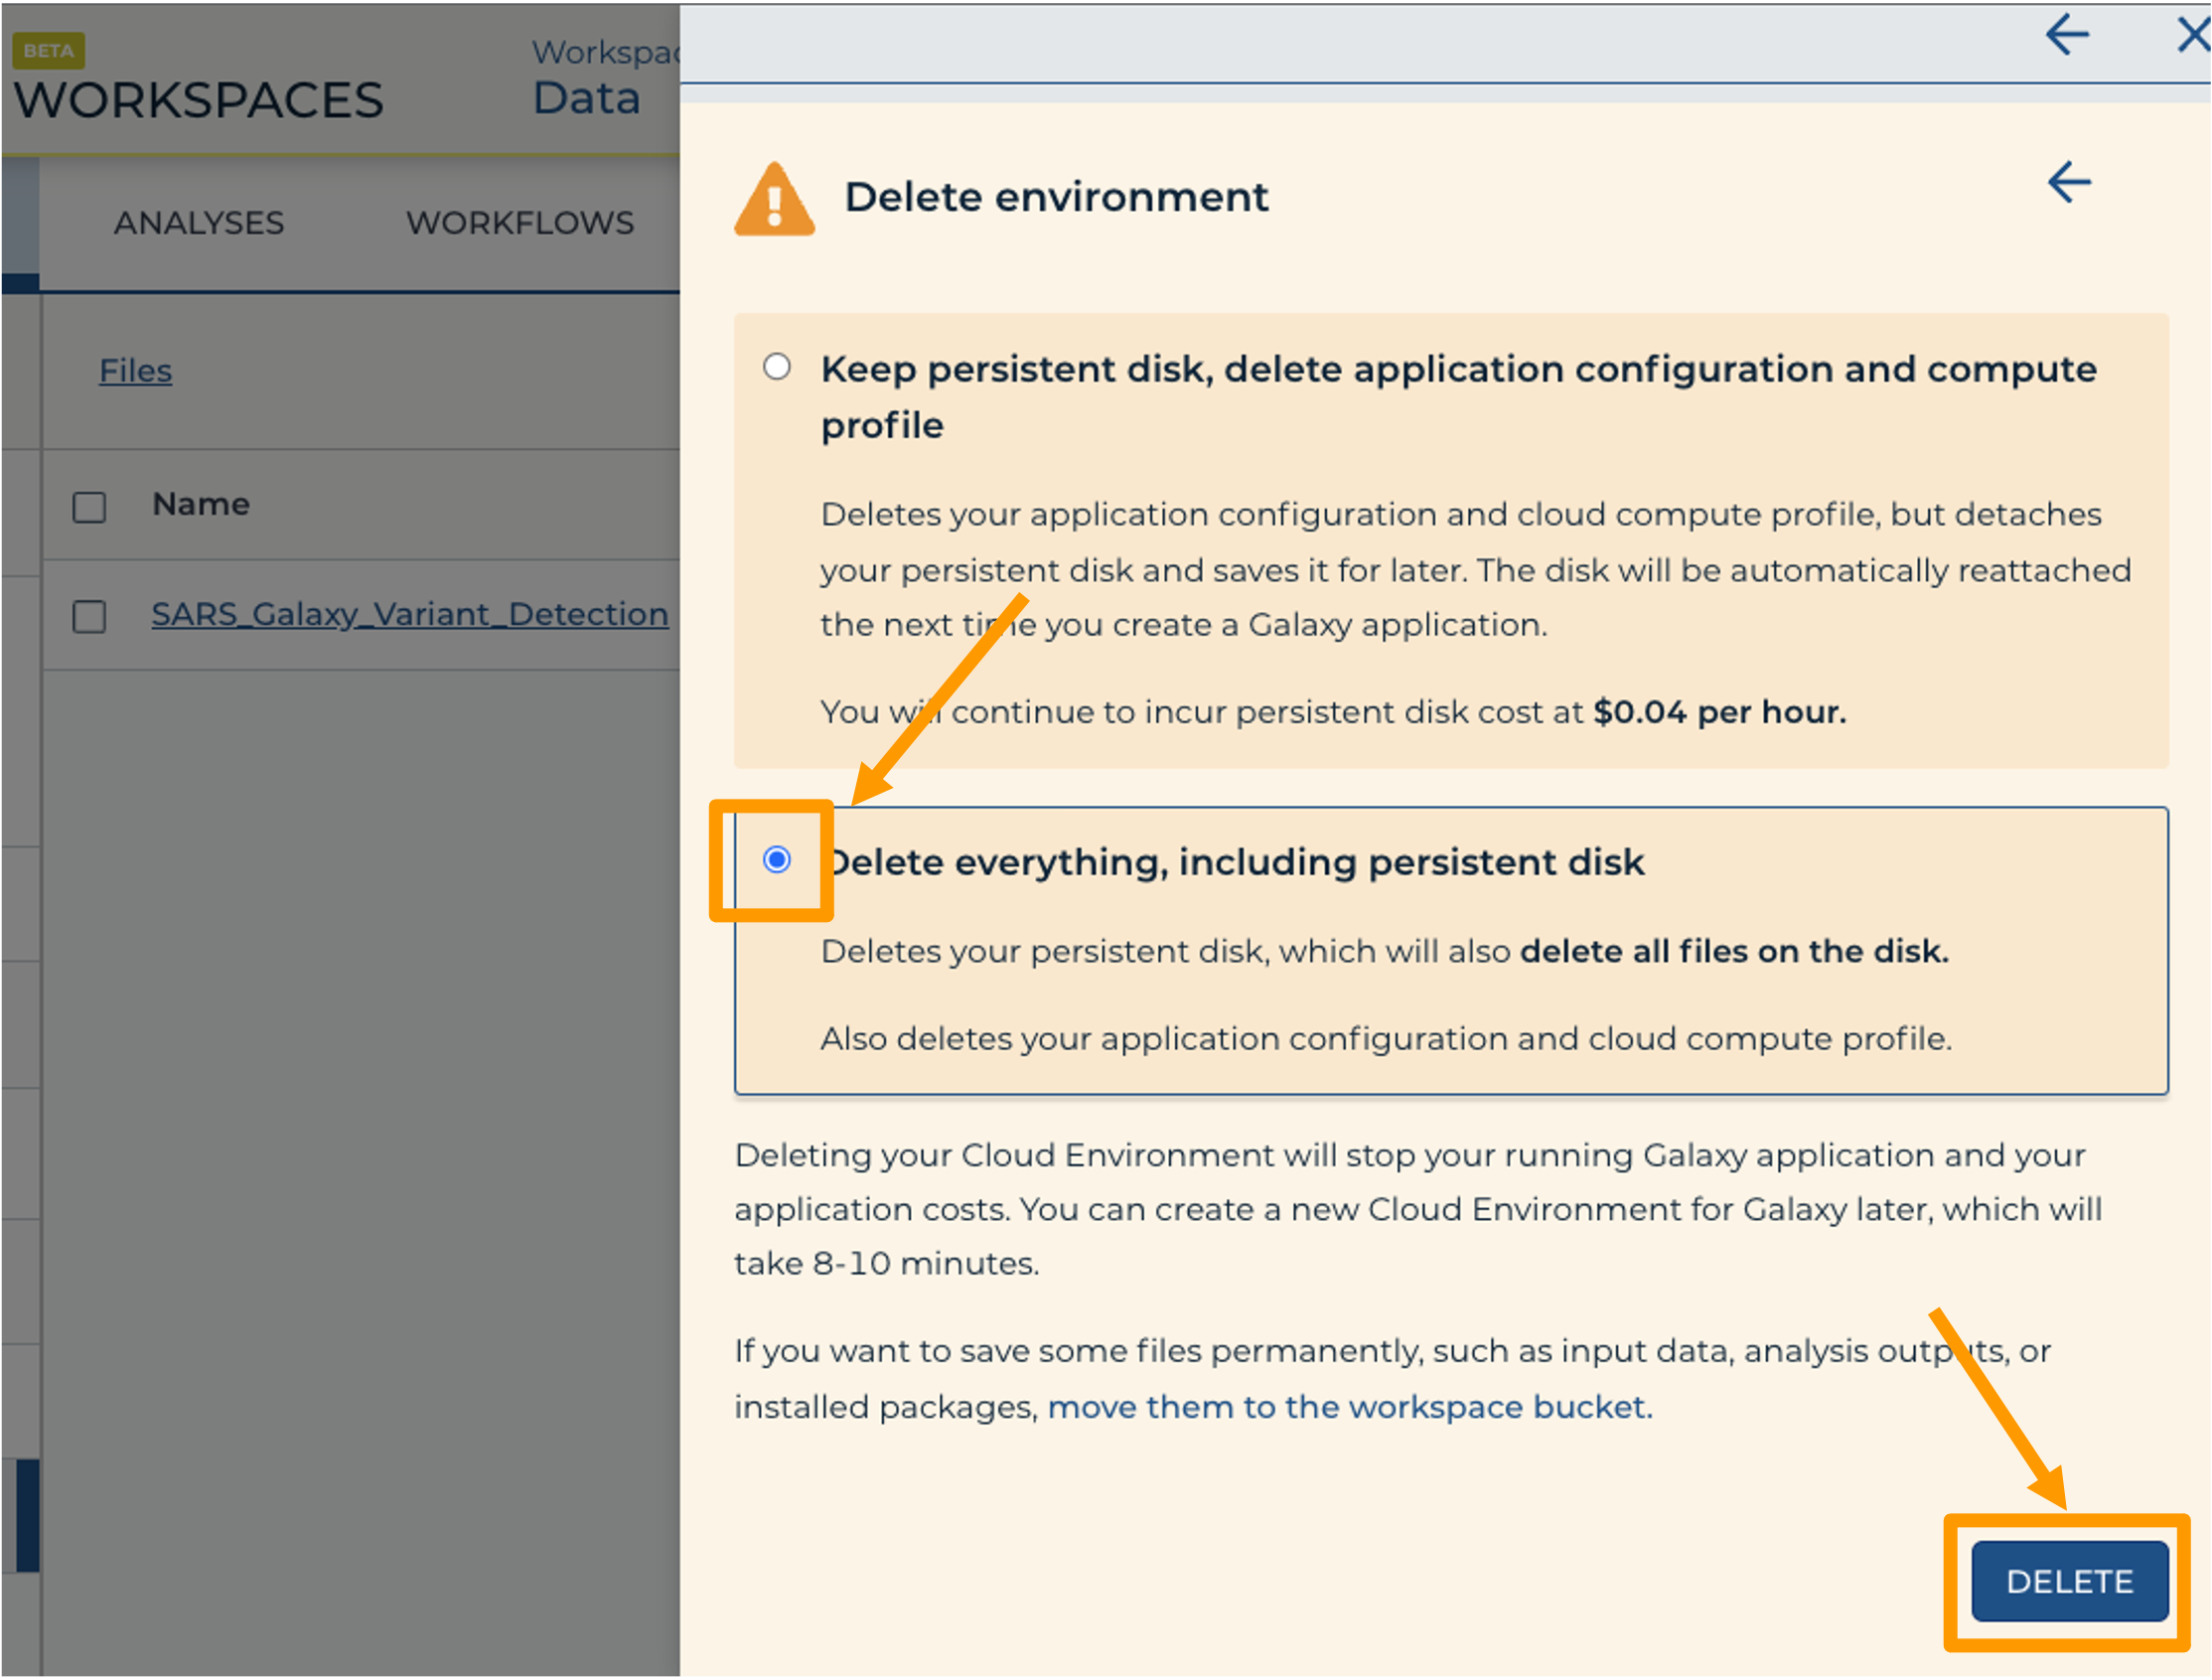 Screenshot of the cloud environment pop out menu. The “Delete everything, including persistent disk” radio button has been checked and is highlighted. The “DELETE” button is highlighted.